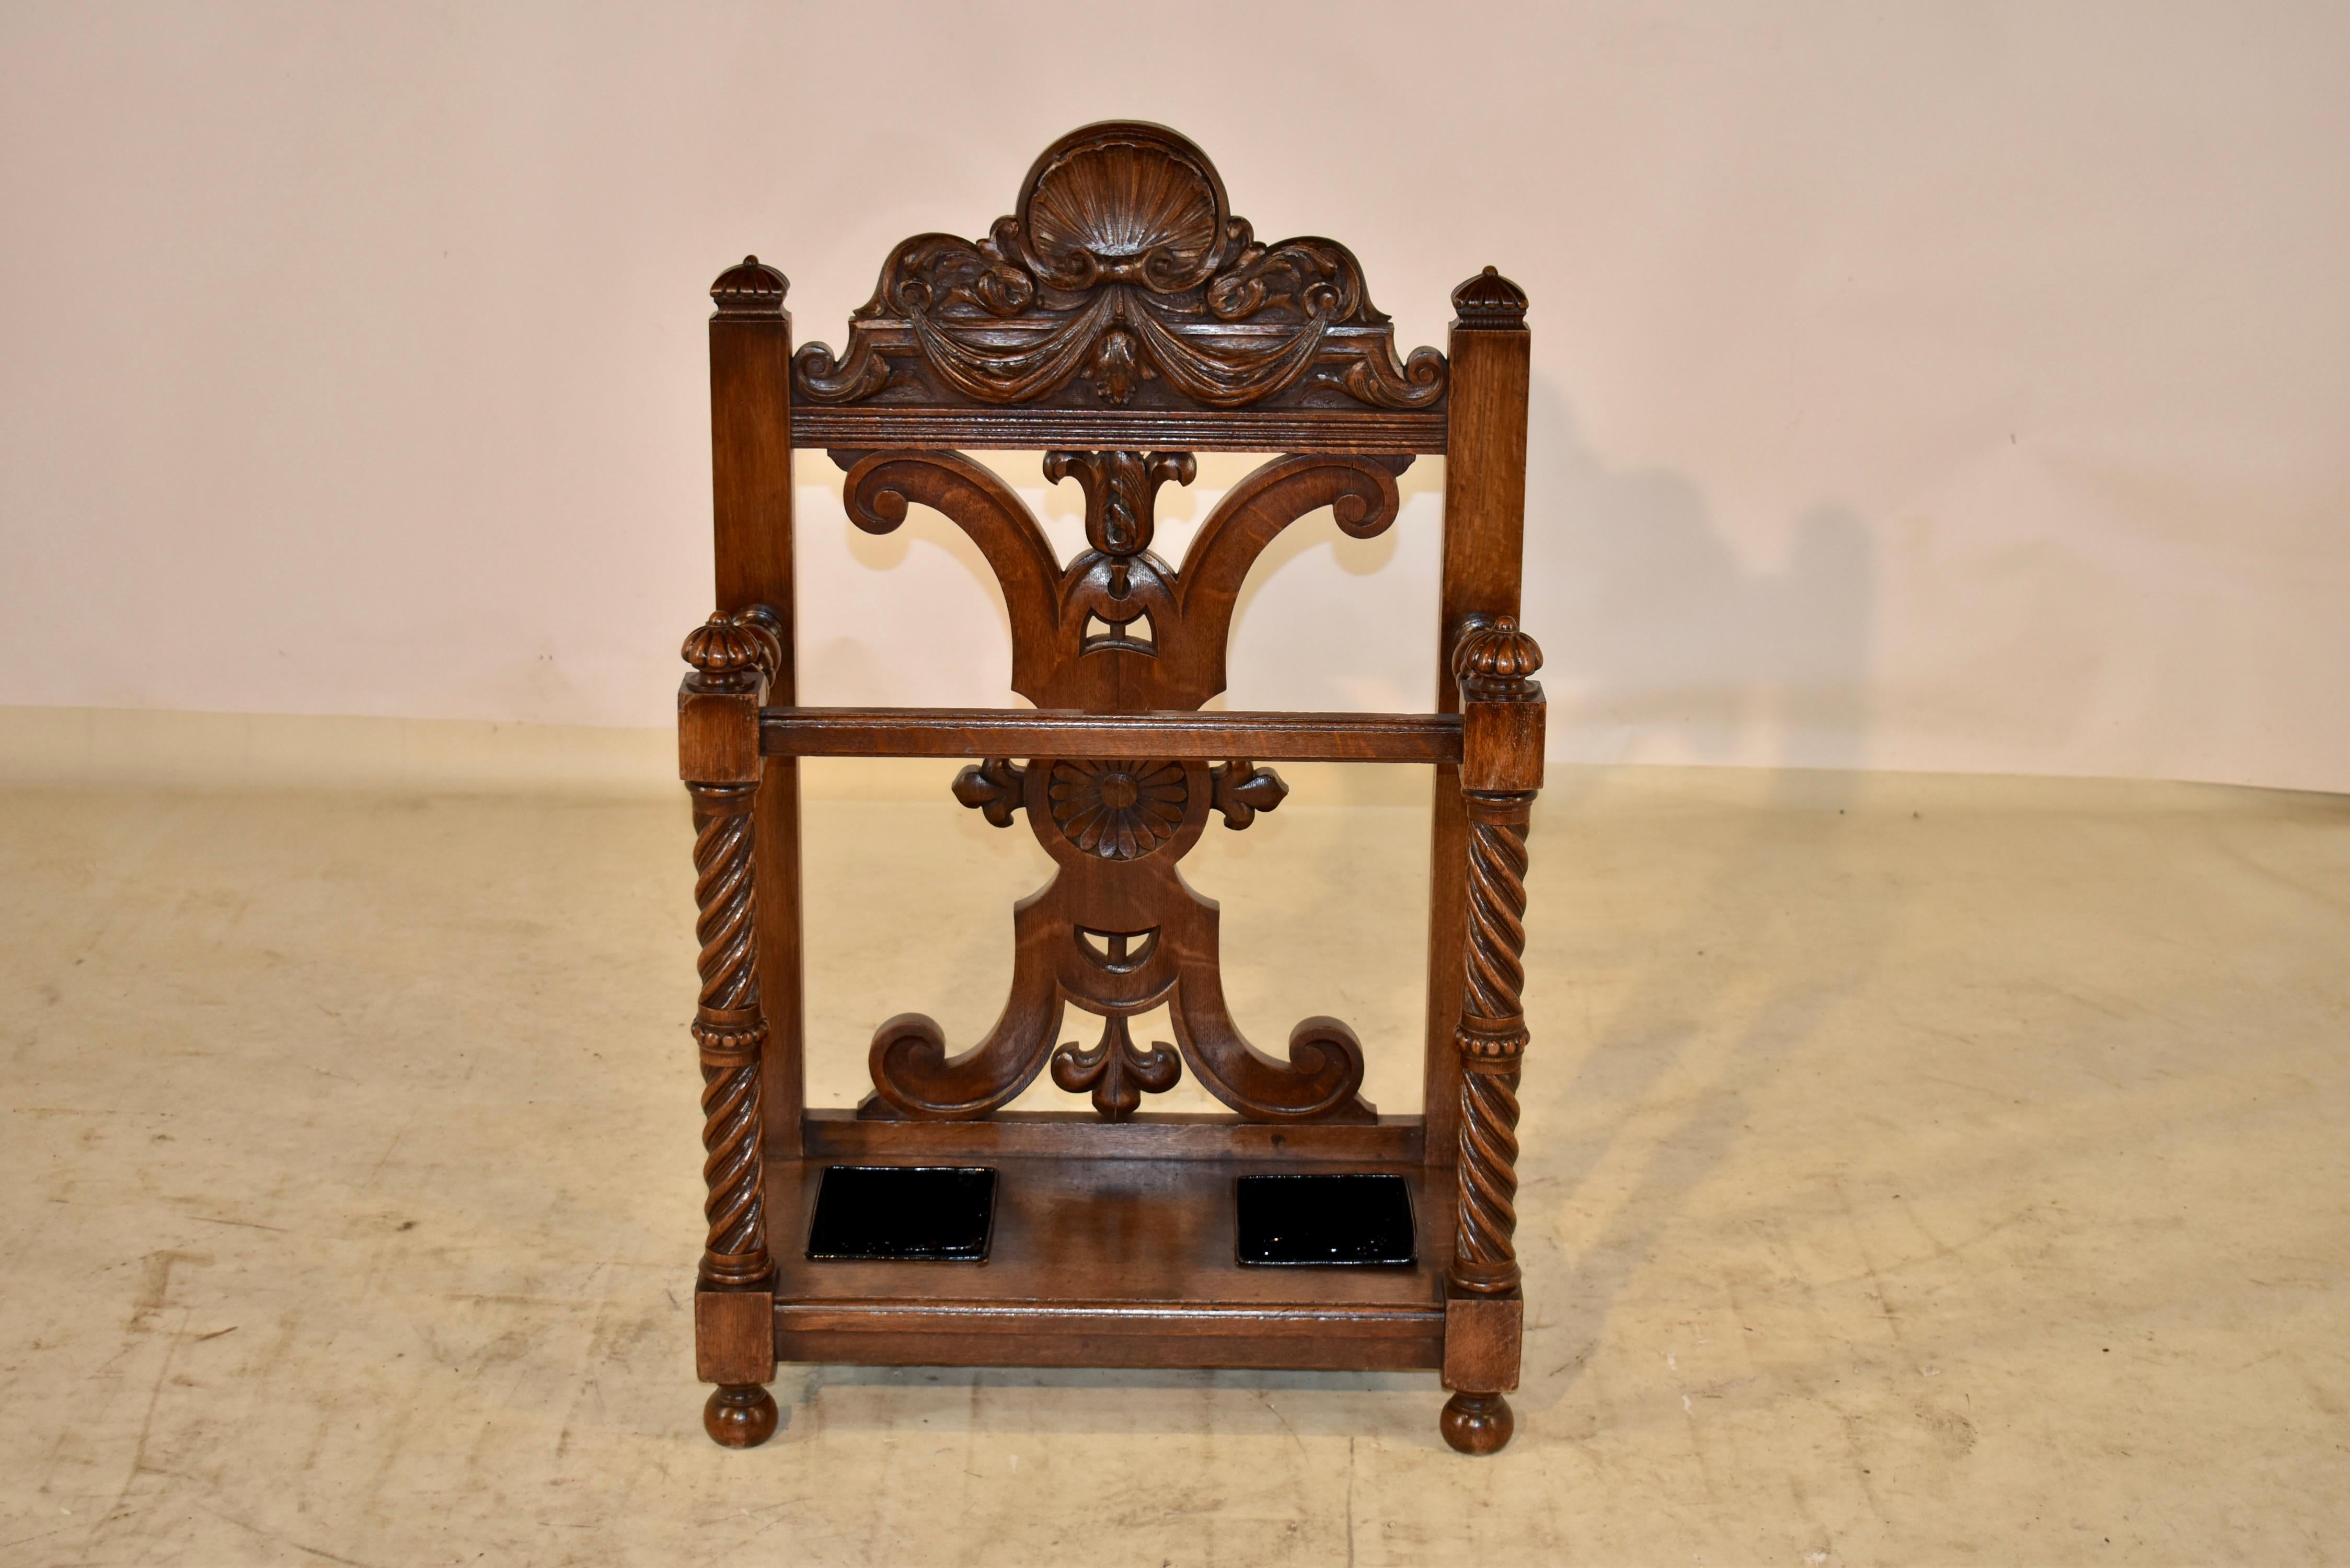 19th century oak umbrella stand from France. This umbrella stand has wonderful hand carved decorative detail throughout. The back has a shell over a carved swag, following down to a carved and shaped back flanked on either side by a post and finial